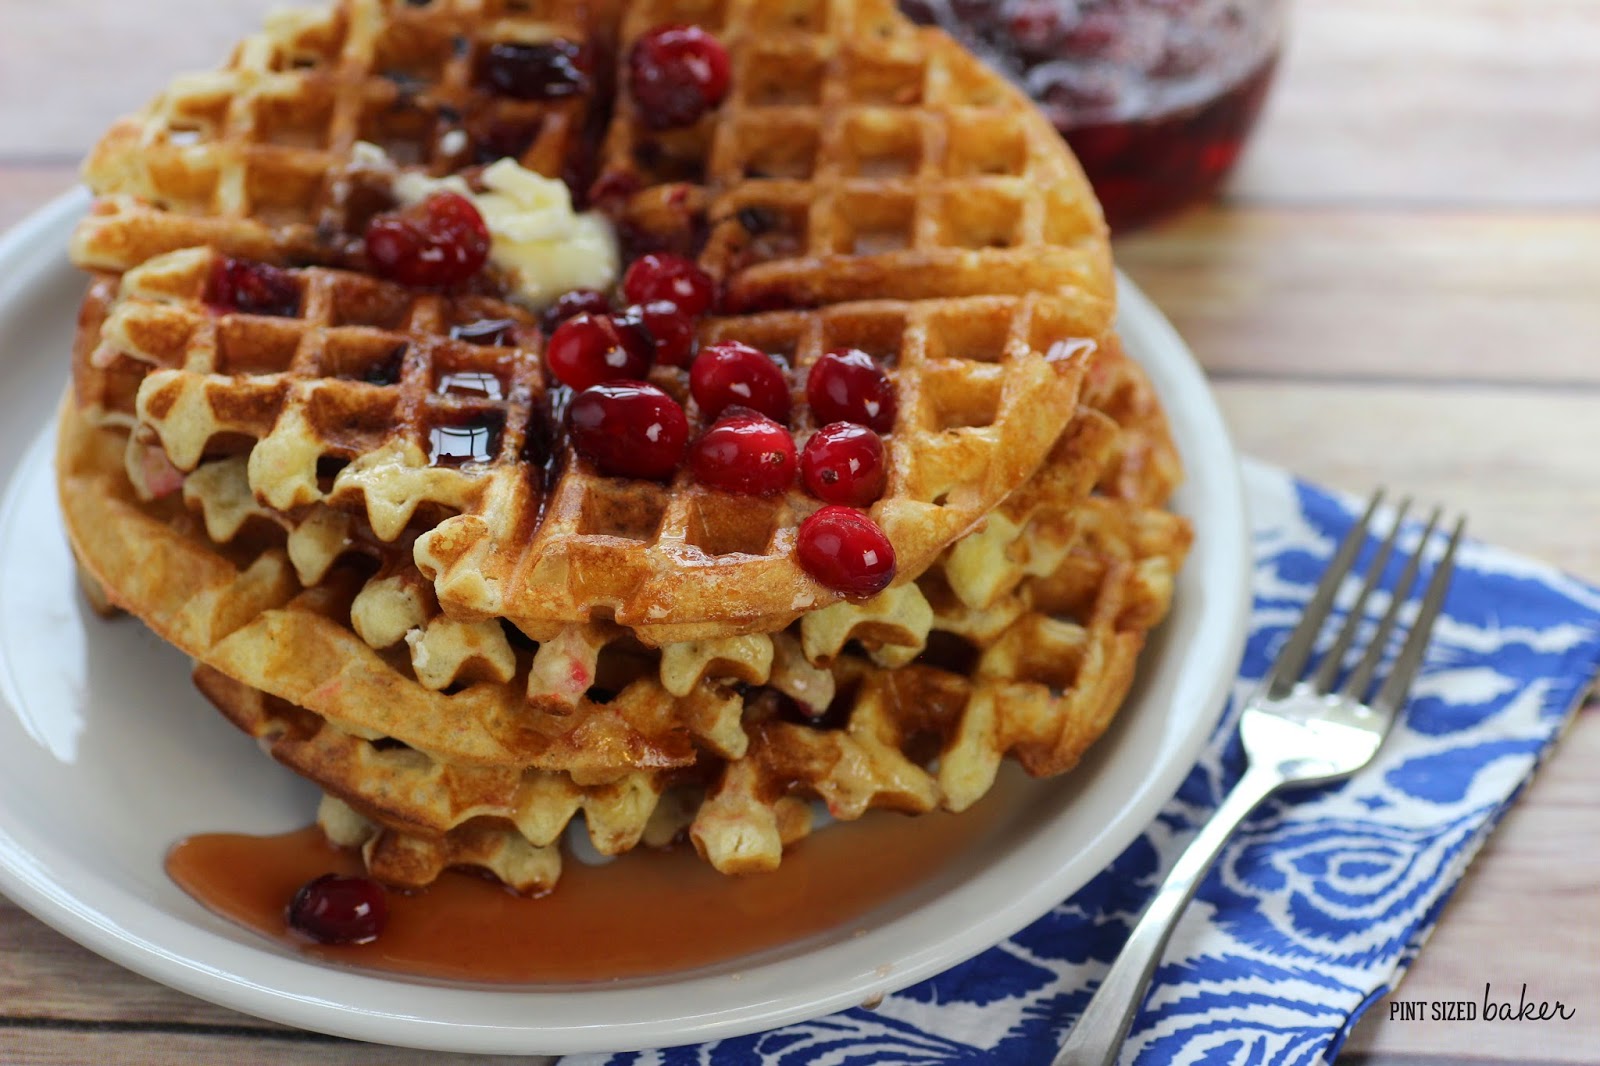 Tart Cranberries ready to "pop" in your mouth. They aren't too tart cooked in these waffles.